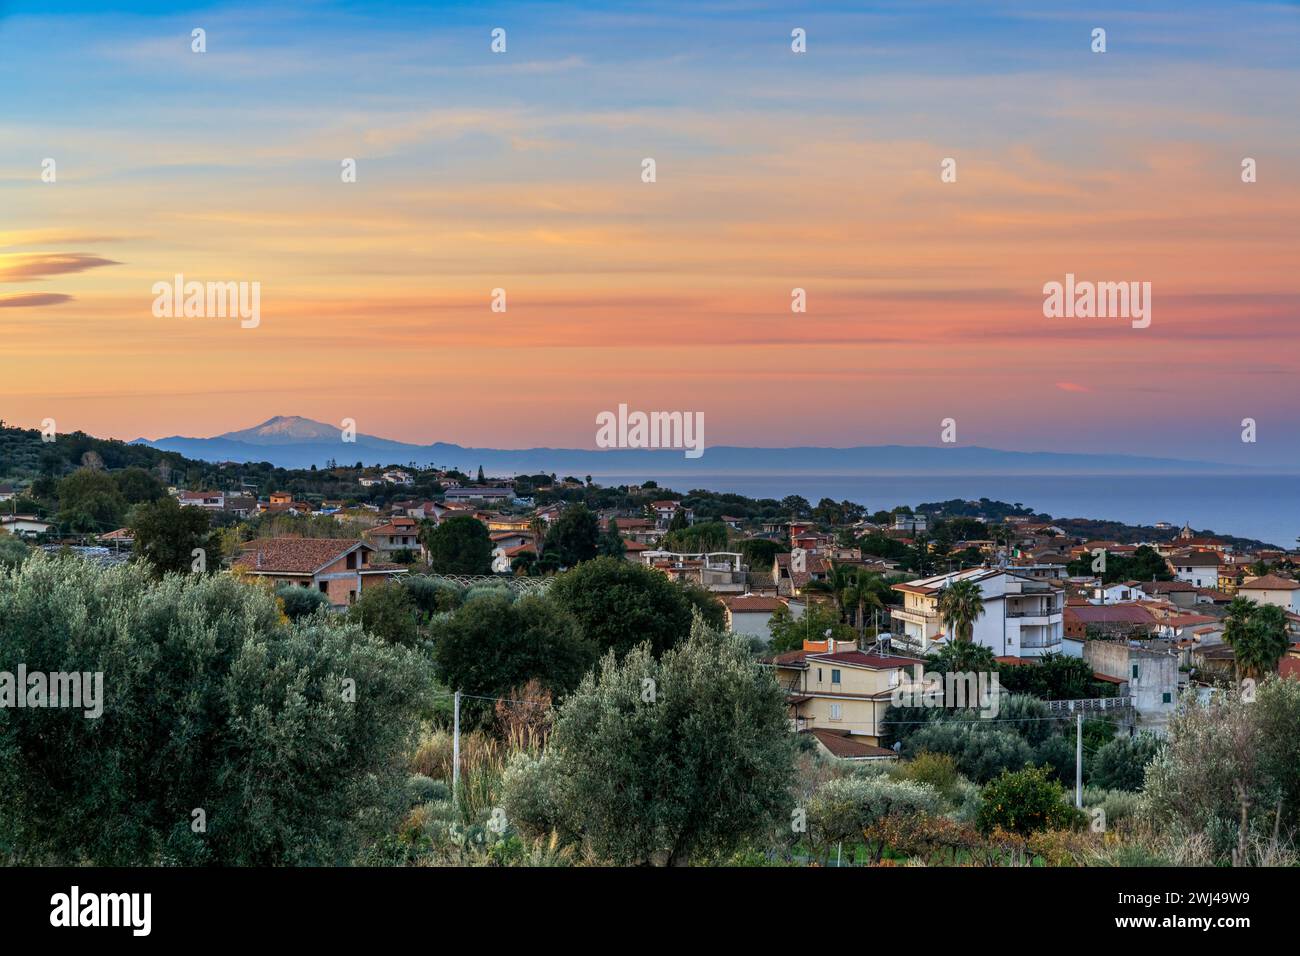 View of the village of Ricadi in Calabria at sunrise with Sicily and Mount Etna in the background Stock Photo